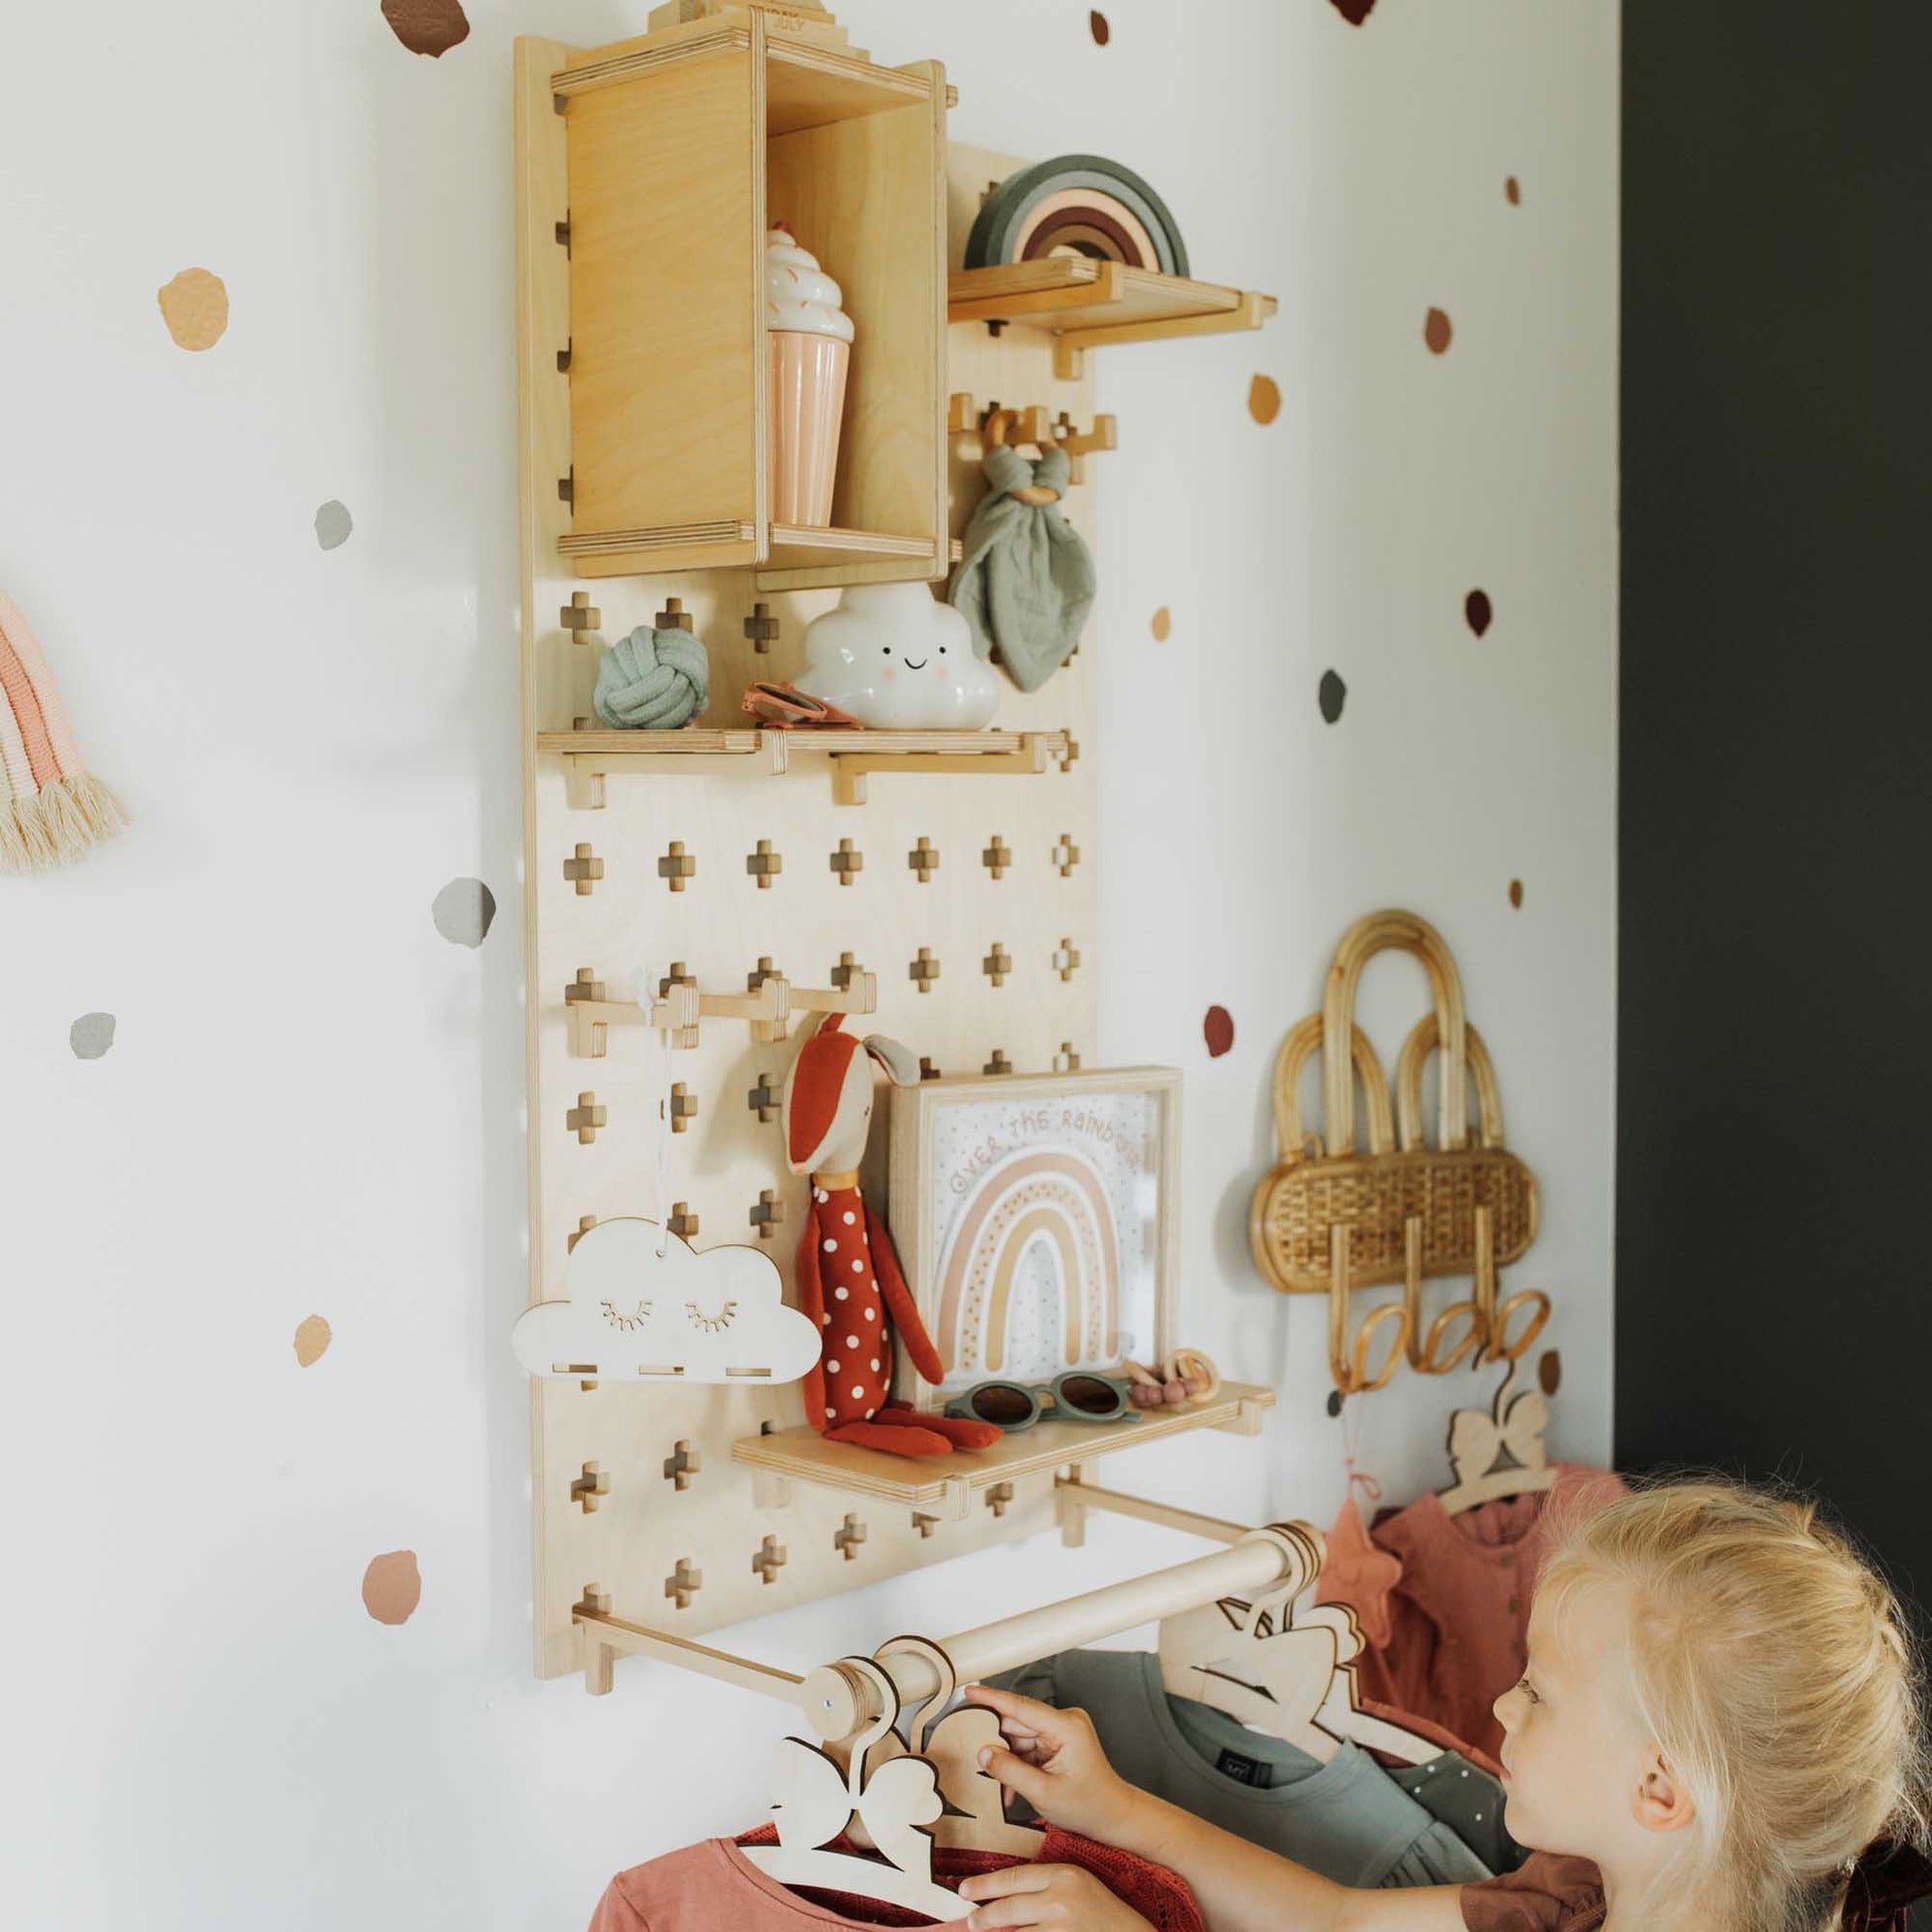 A little girl is sitting on a bed in a room with polka dot walls, surrounded by floating shelves made from Sweet HOME from wood Pegboard with Clothes Hanger.